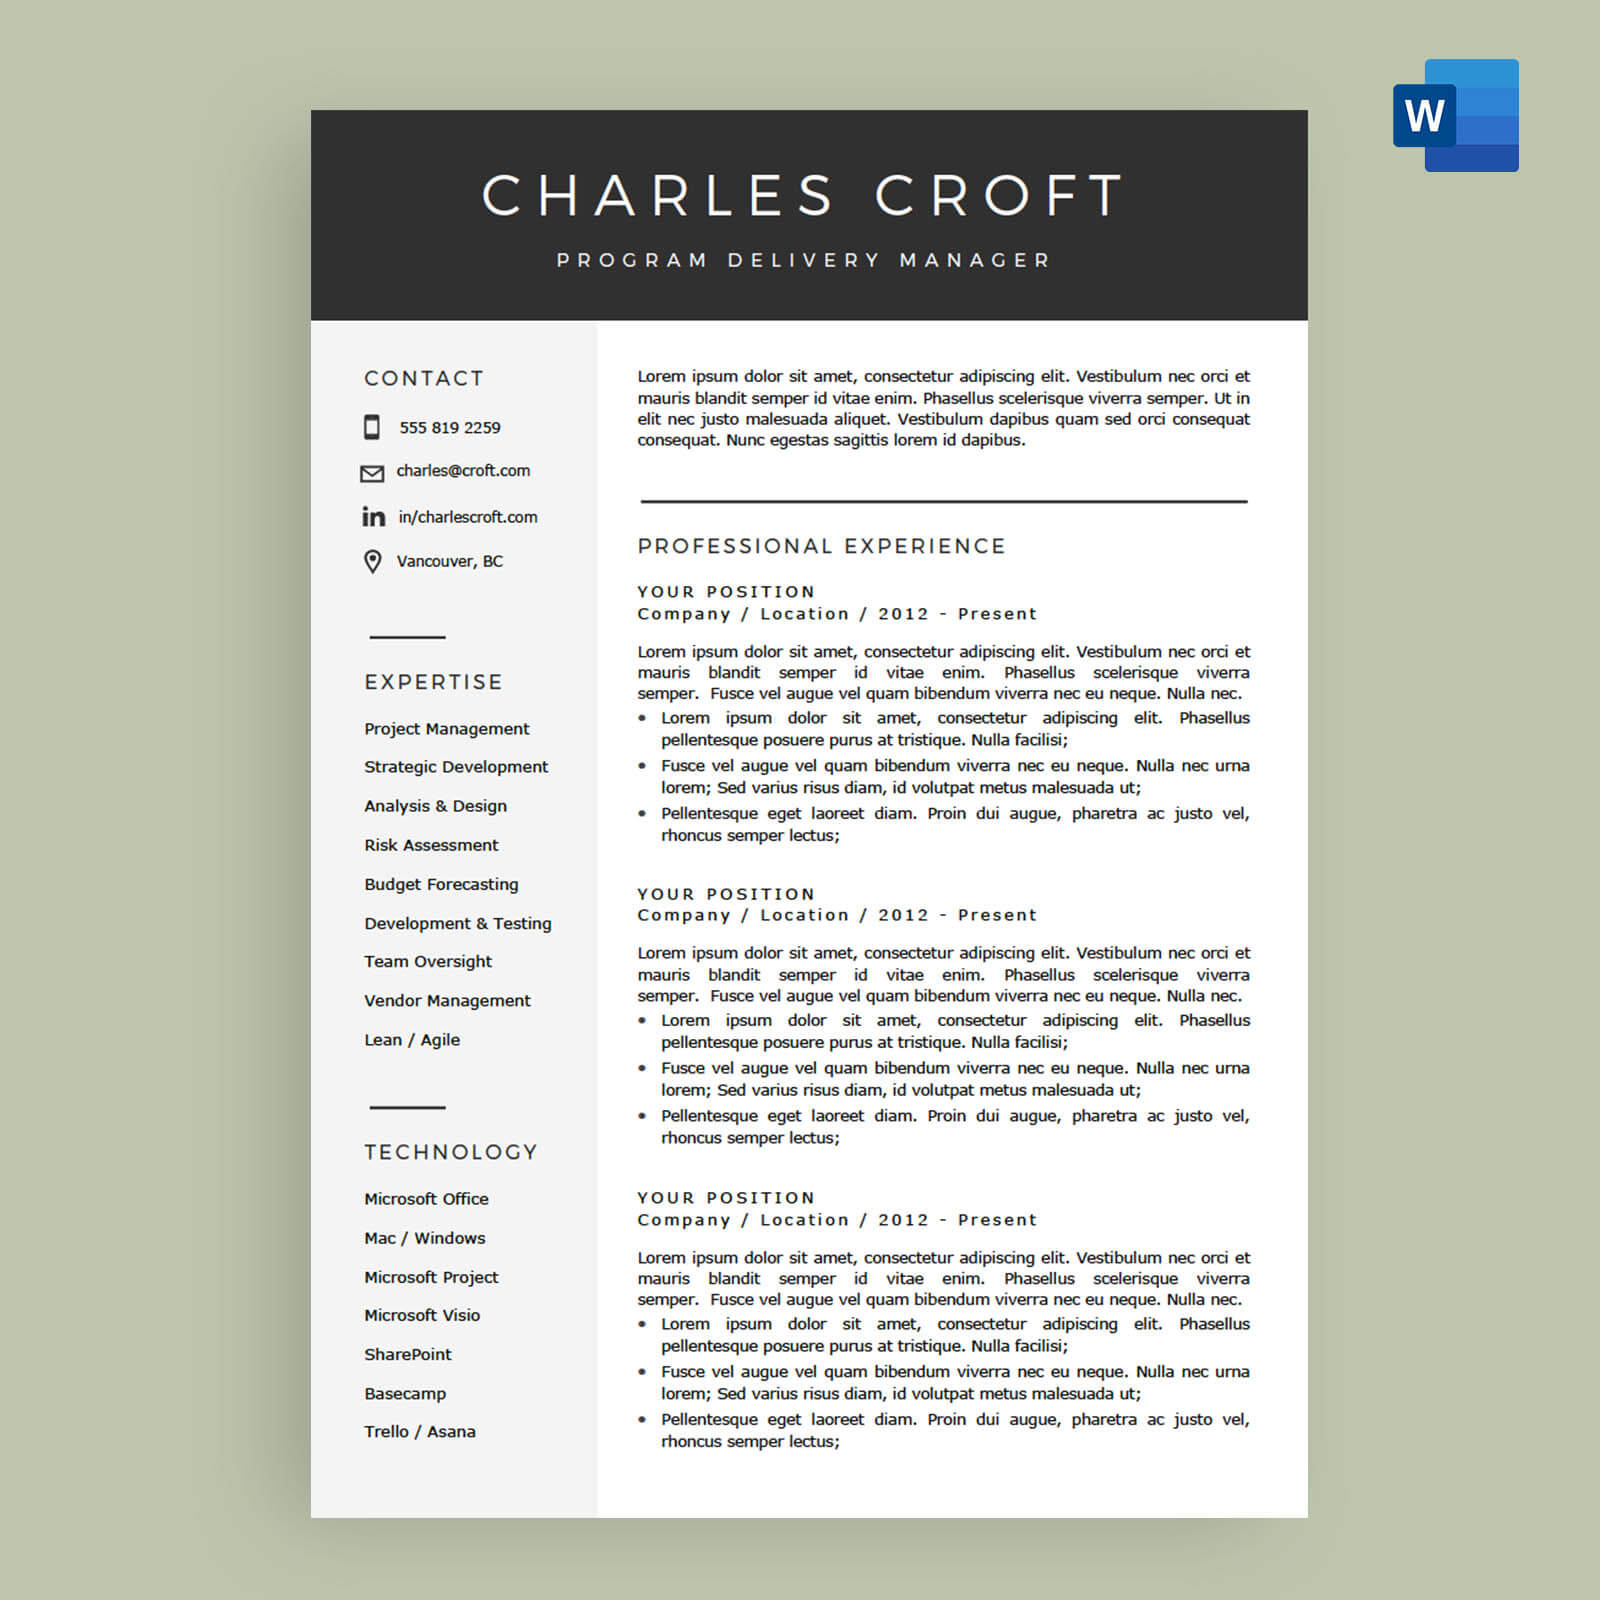 Easy Resume Templates For Microsoft Word Copy Paste And Impress Employers Invitation